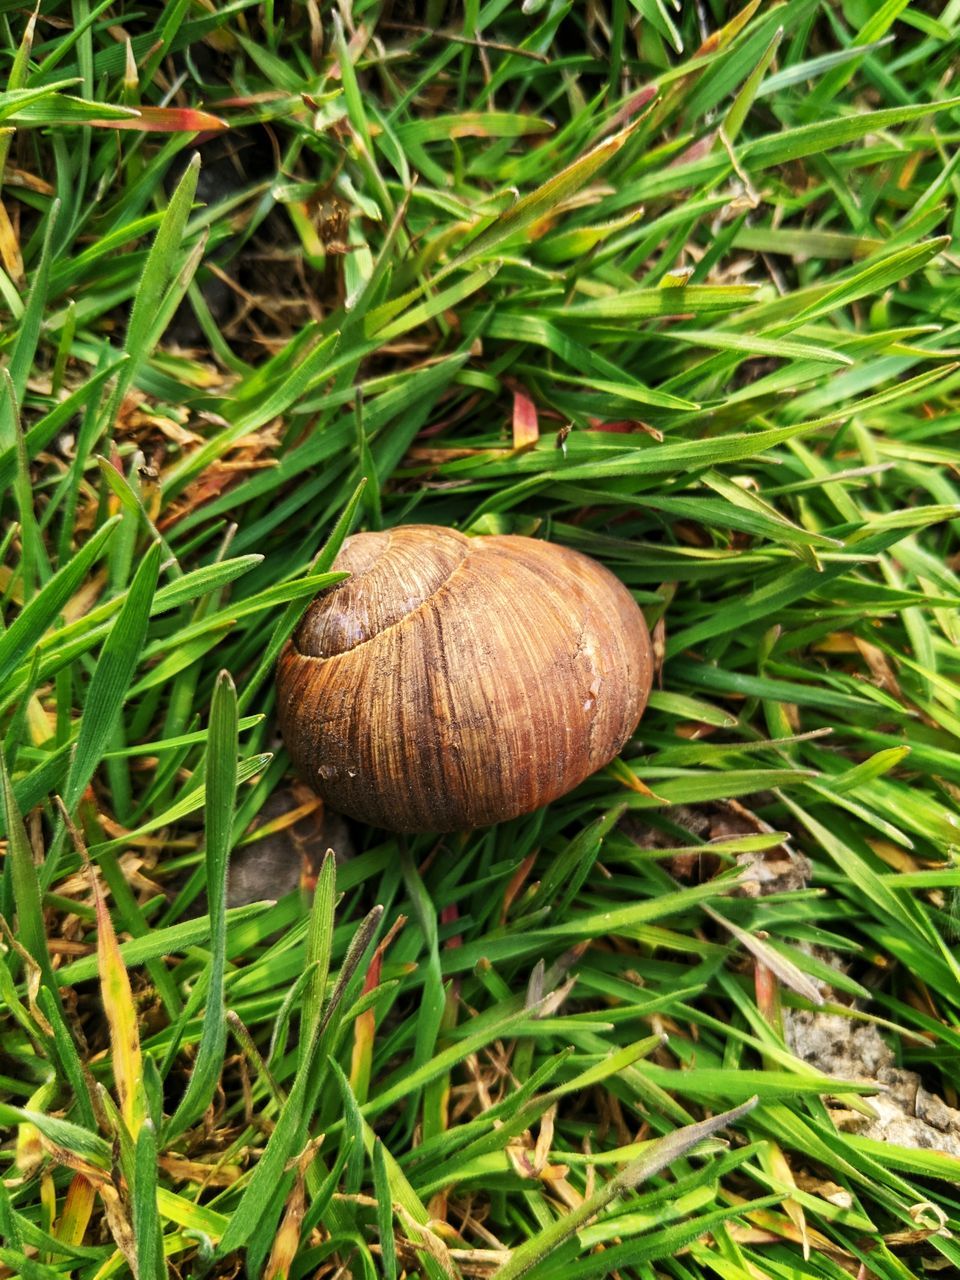 grass, plant, green, nature, growth, land, no people, day, field, high angle view, close-up, lawn, gastropod, food, mollusk, outdoors, snail, snails and slugs, food and drink, shell, vegetable, beauty in nature, animal wildlife, leaf, animal shell, mushroom, freshness, tree, animal, brown, fungus